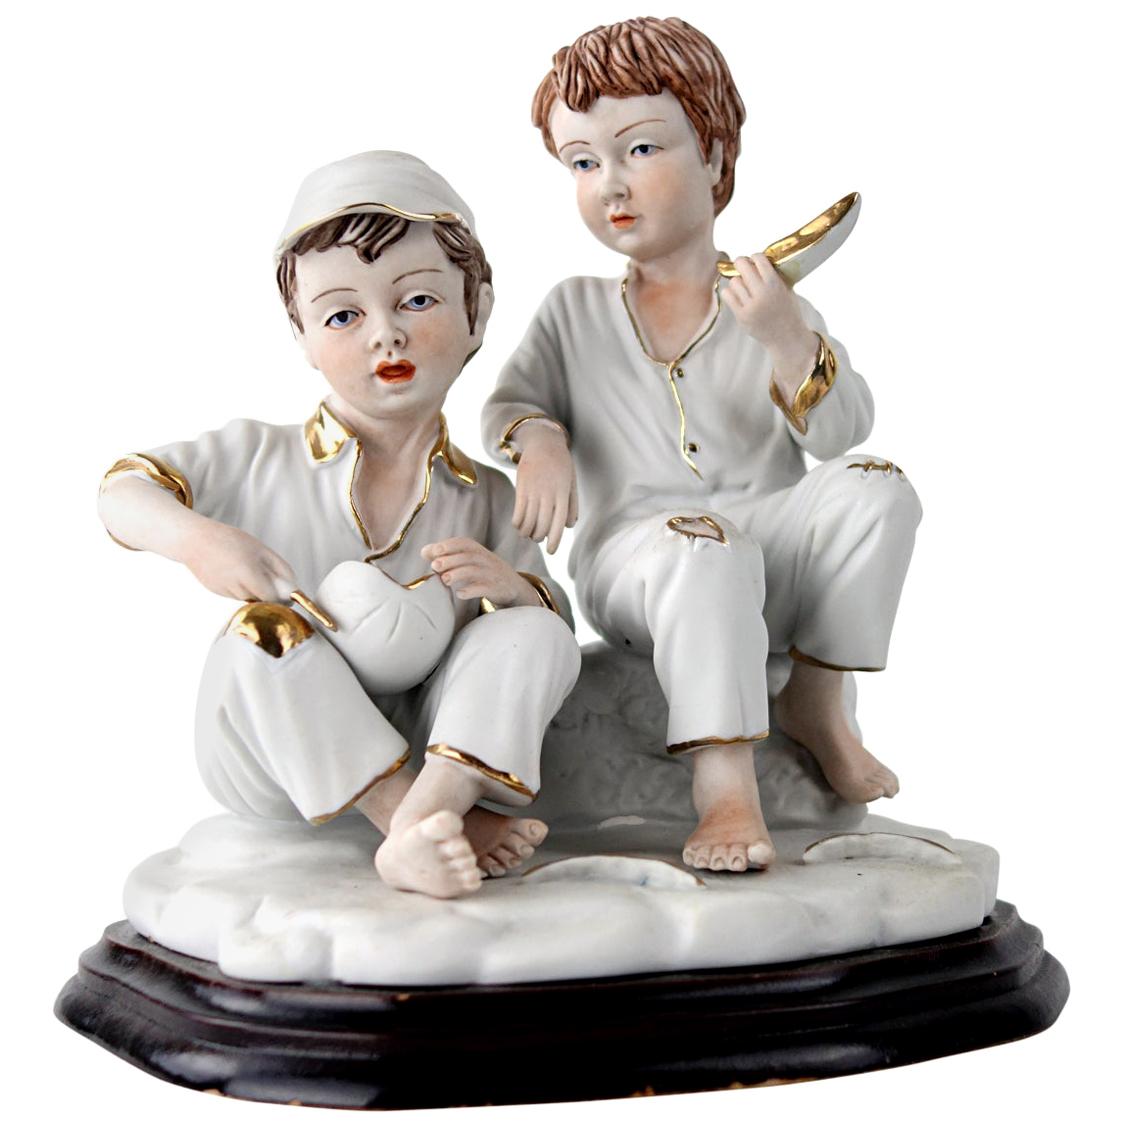 Biscuit Porcelain Statuette of Two Boys Eating a Melon with Gold-Colored Details For Sale